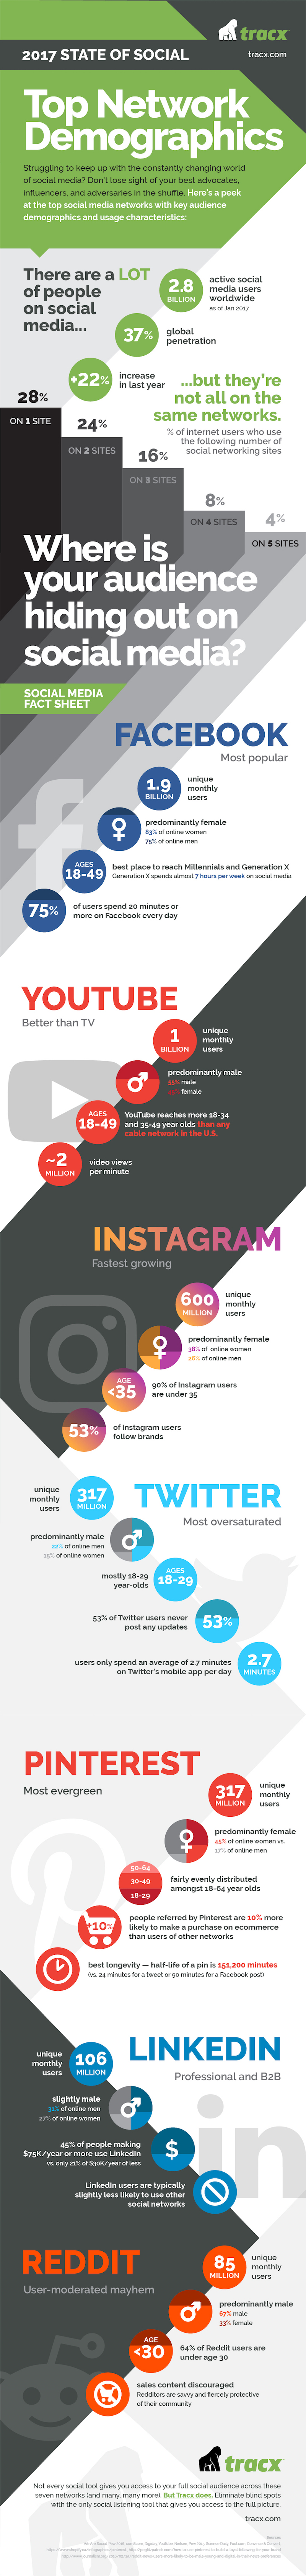 The Key Differences in Demographics for the Top 7 Social Networks